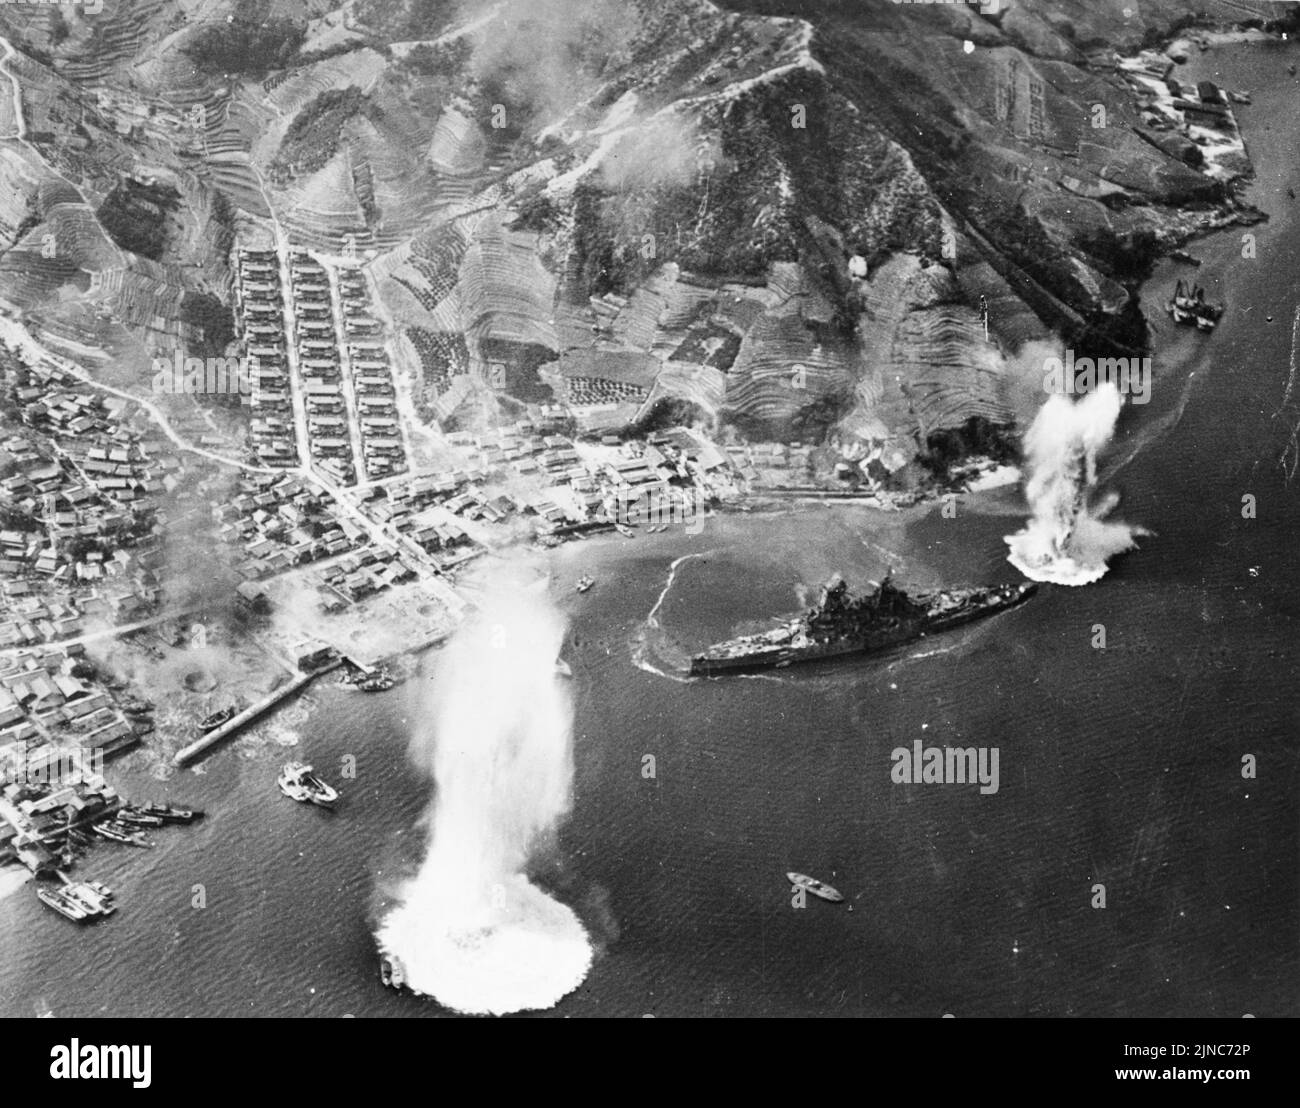 Imperial Japanese Navy battleship Haruna at her moorings near Kure, Japan, under attack by U.S. Navy carrier aircraft, 28 July 1945. The ship was hit and destroyed at he rmoorings during this attack. Stock Photo